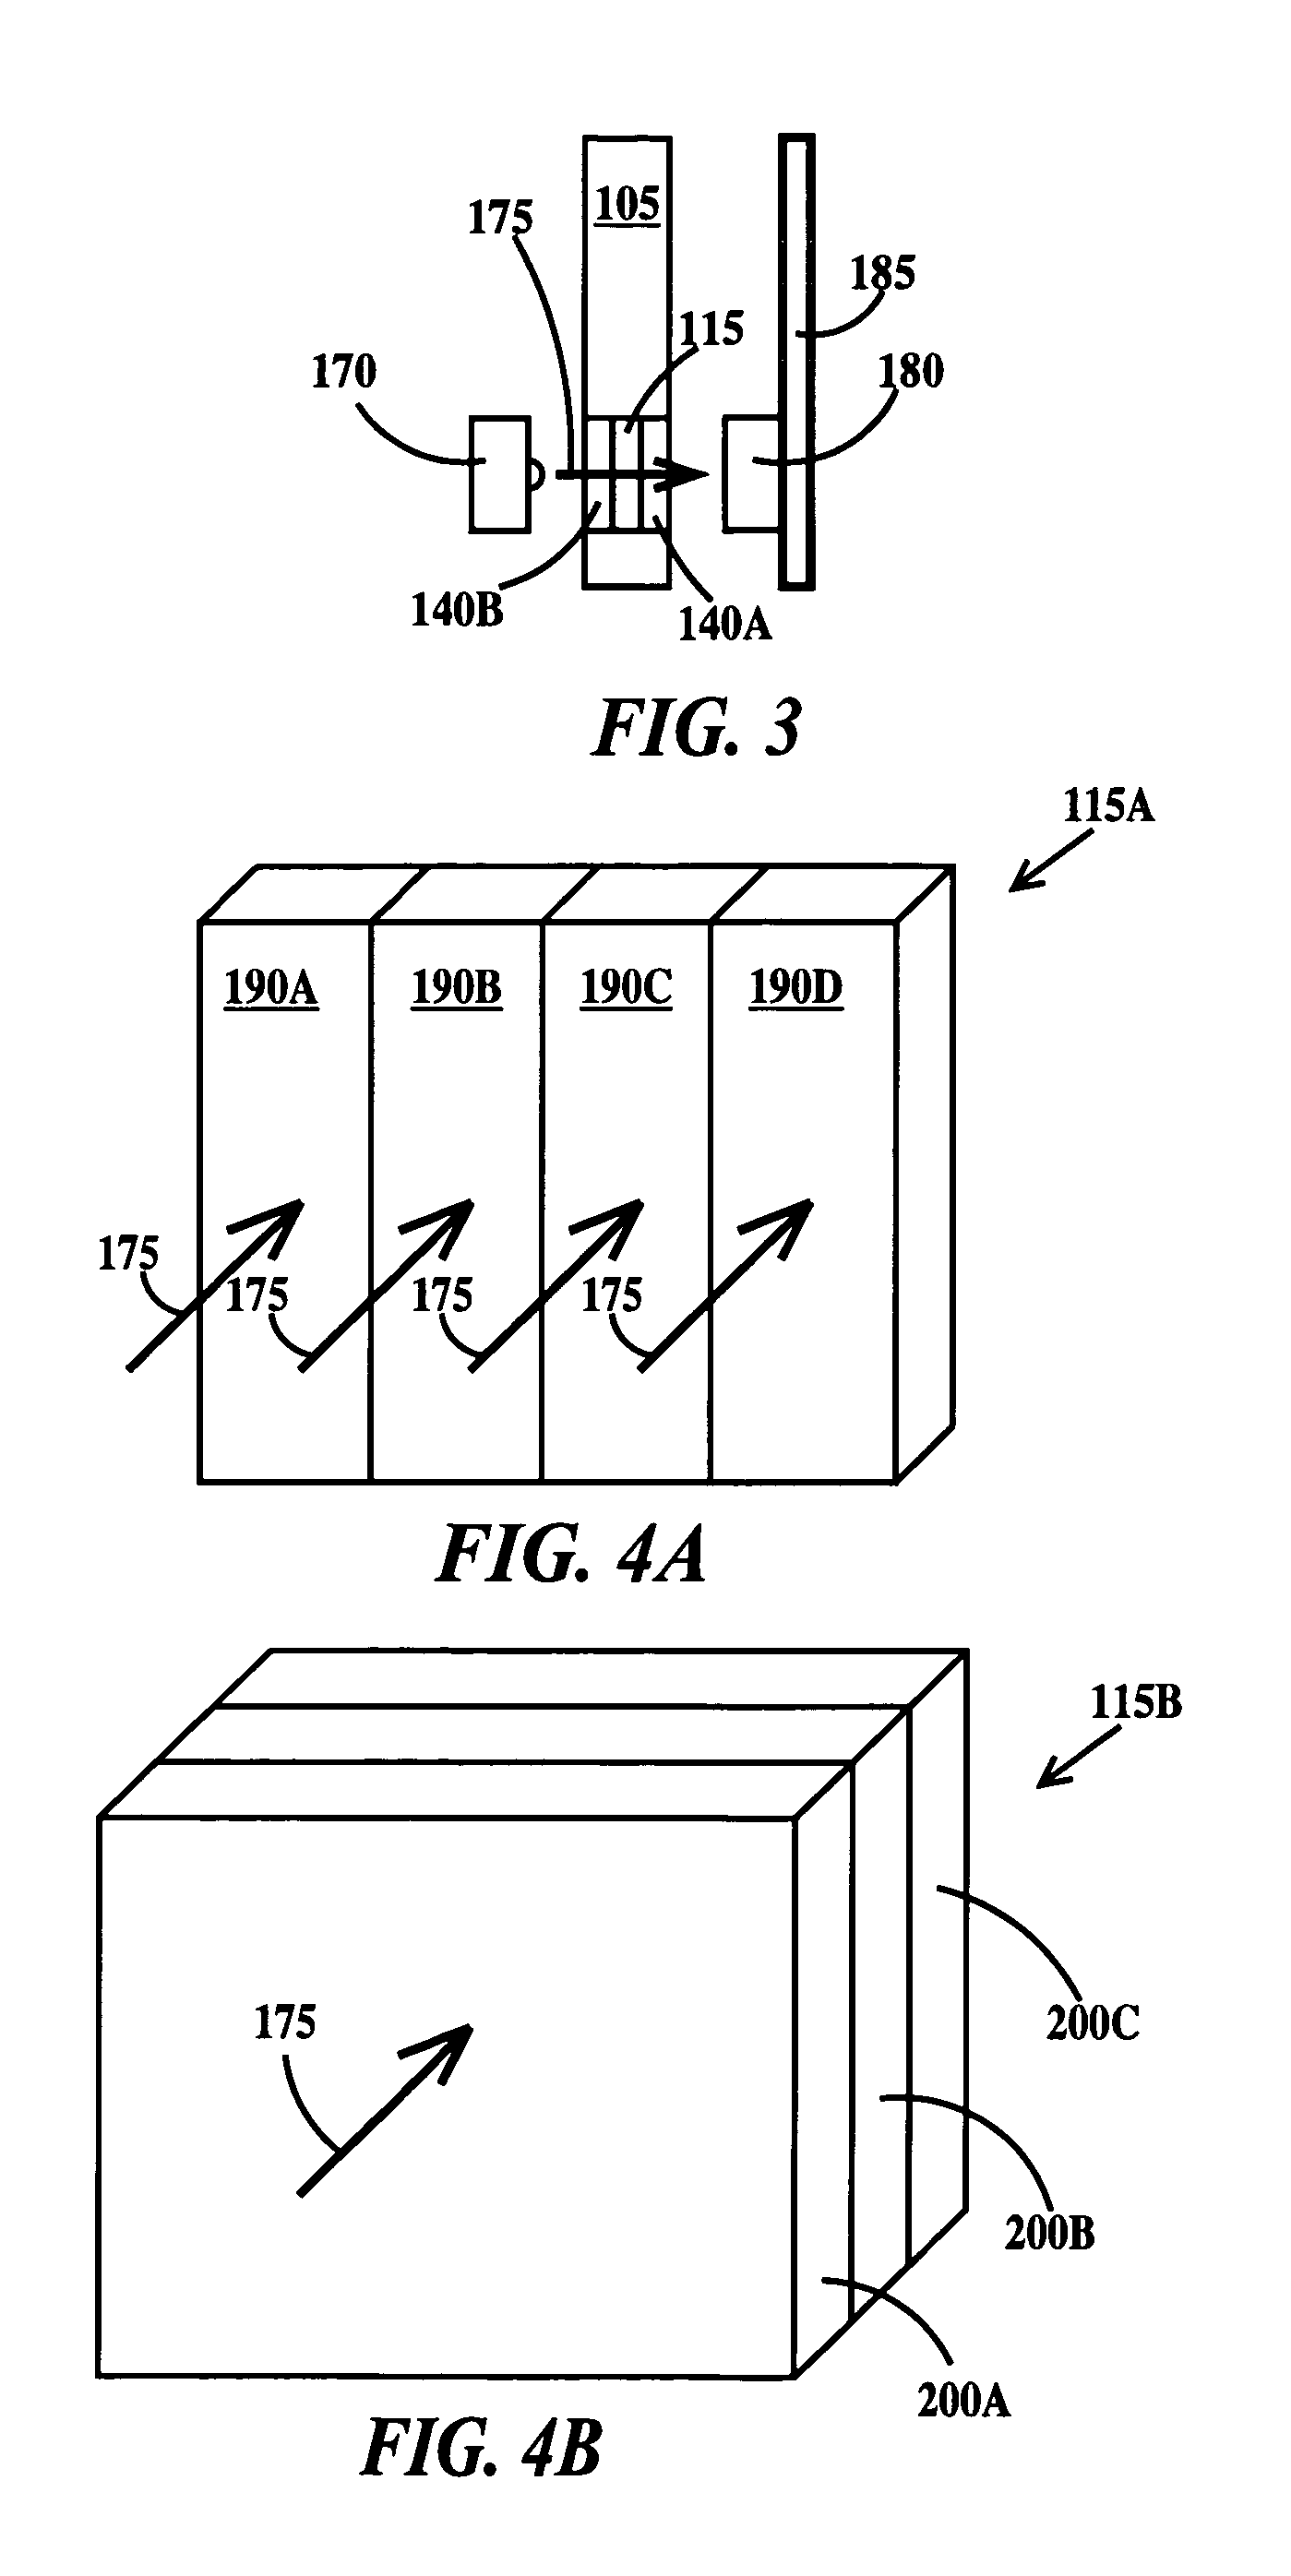 Method of detecting and transmitting radiation detection information to a network